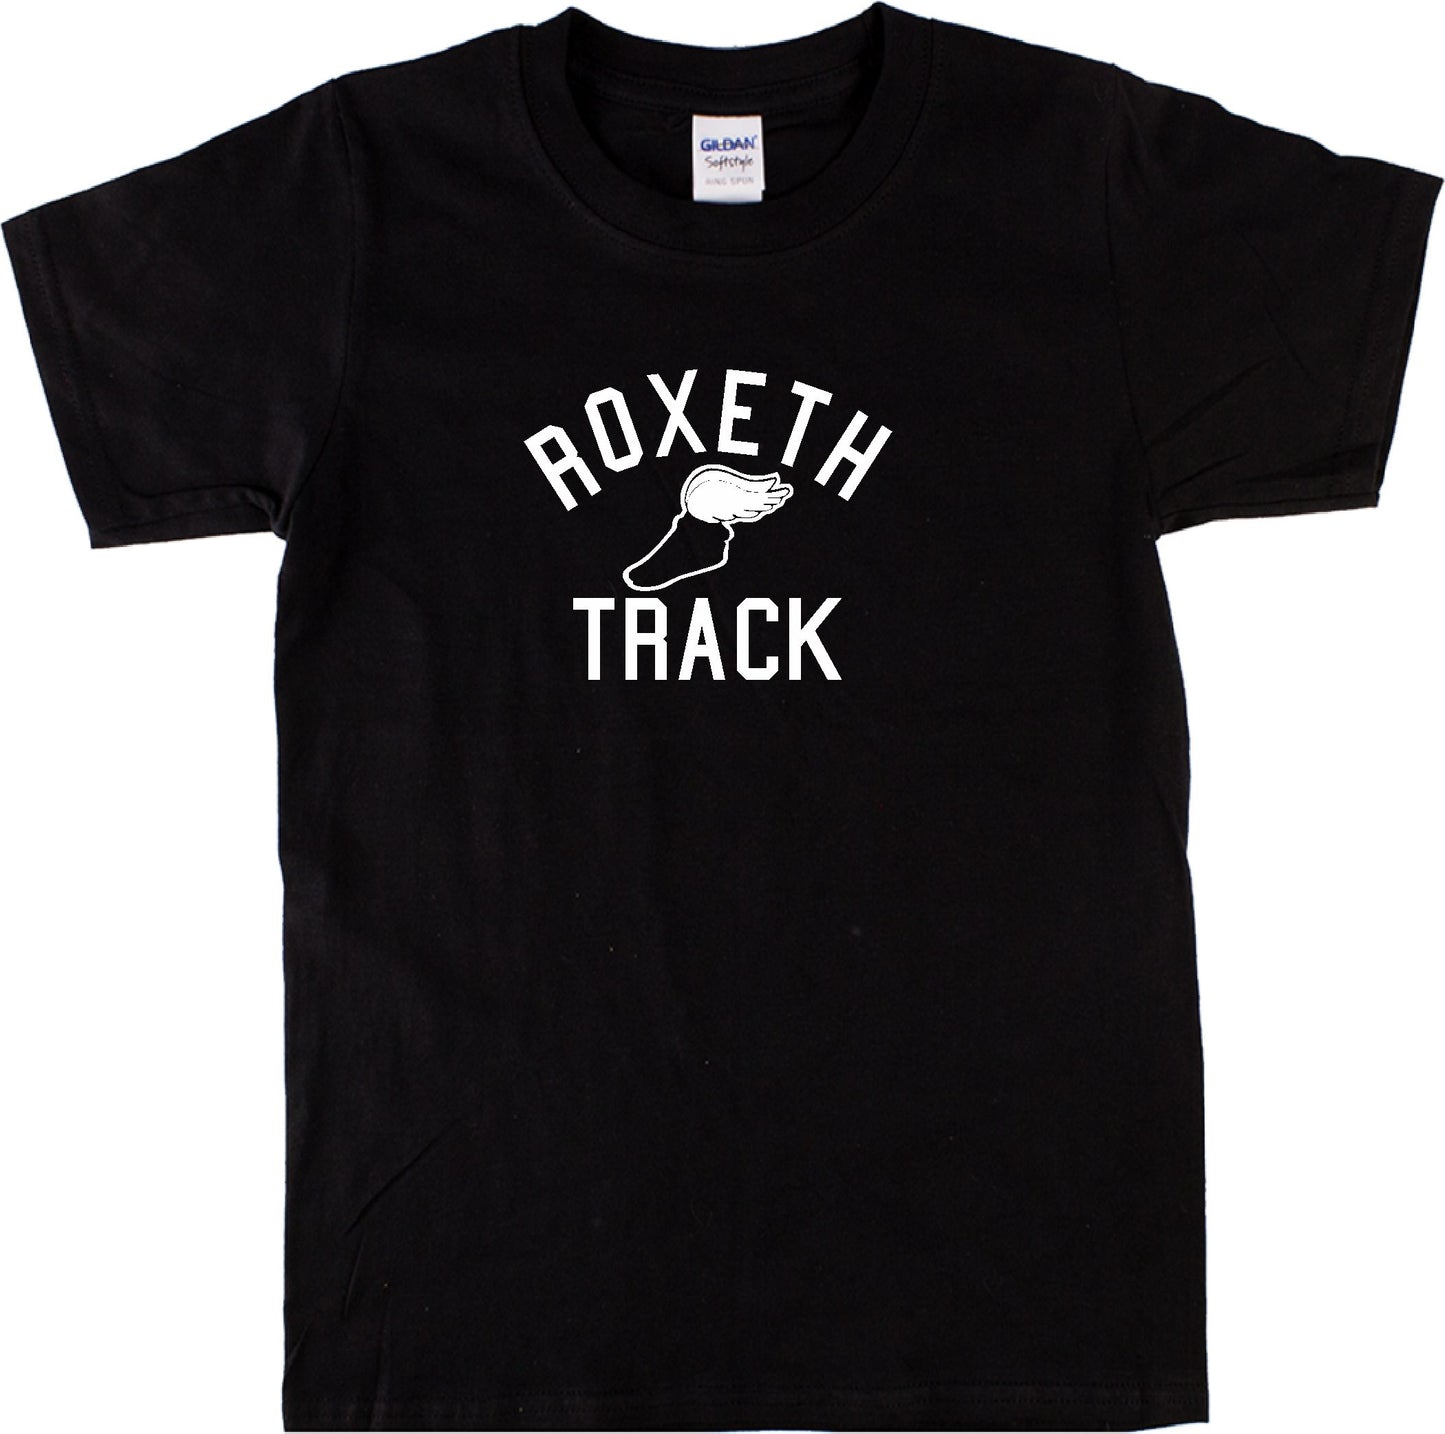 Roxeth Track T-Shirt - Retro Varsity College Style, 50s 60s, Various Colours